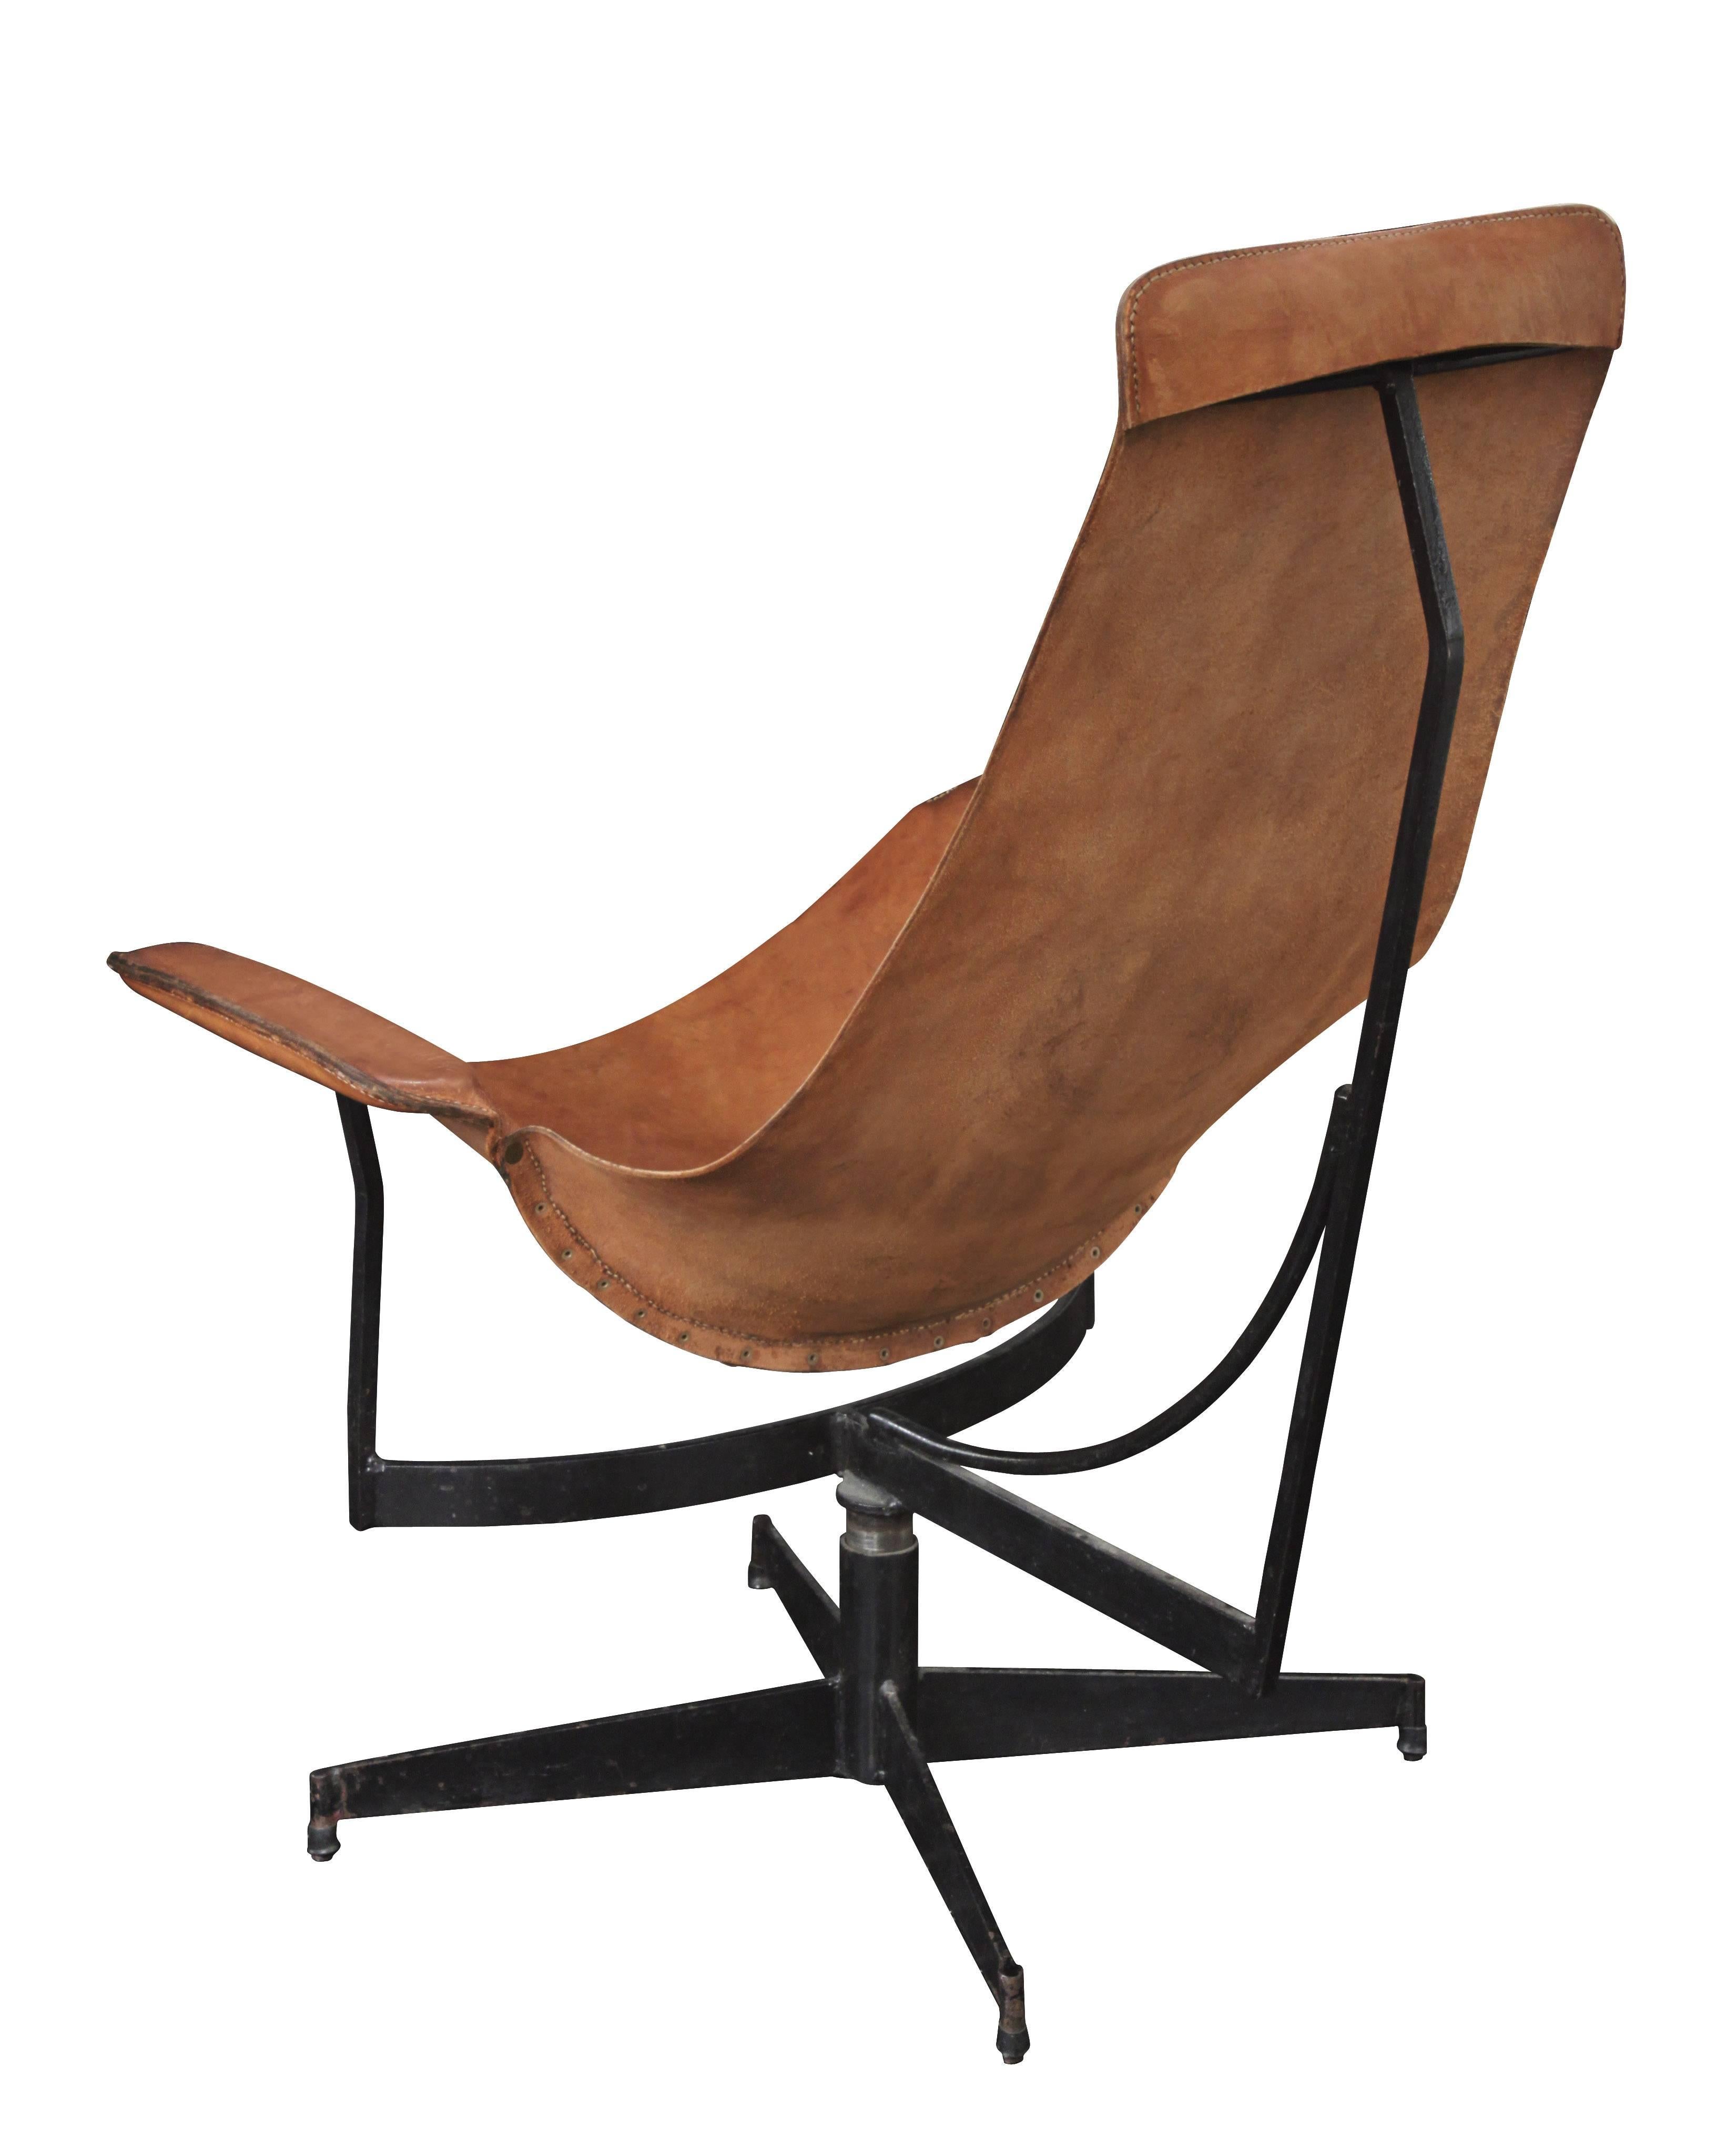 American Pair of Swivelling Sling Chairs by William Katavolos